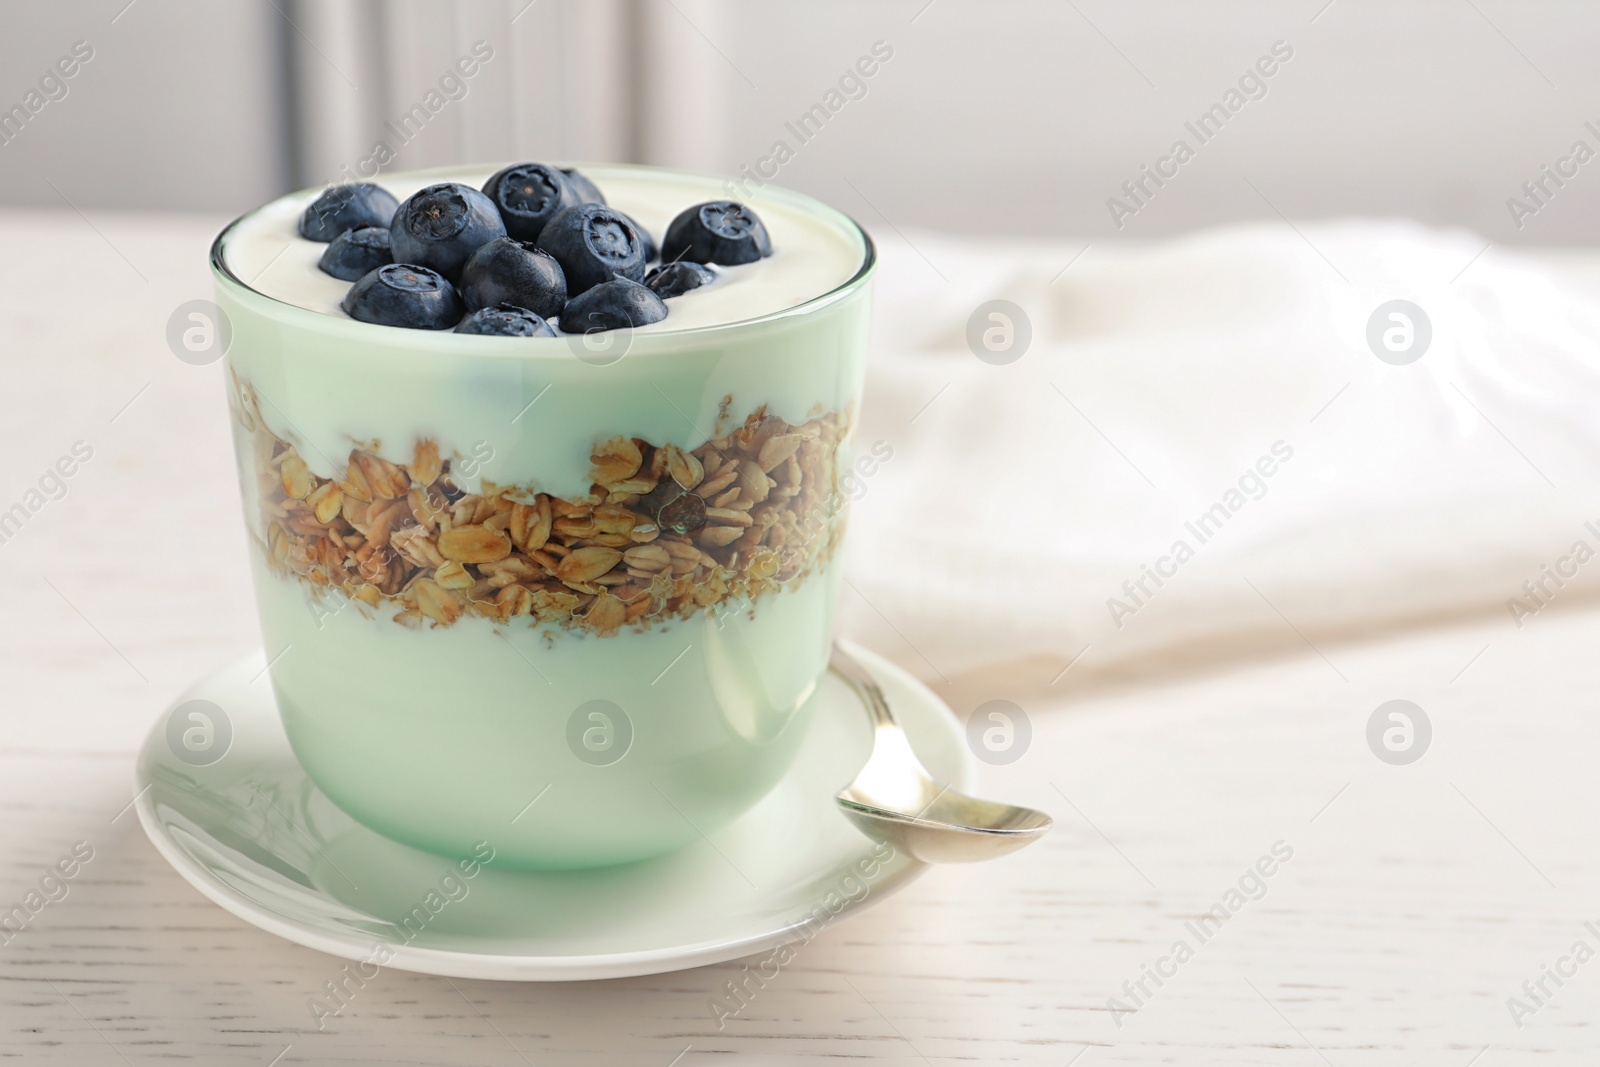 Photo of Glass with yogurt, berries and granola on table